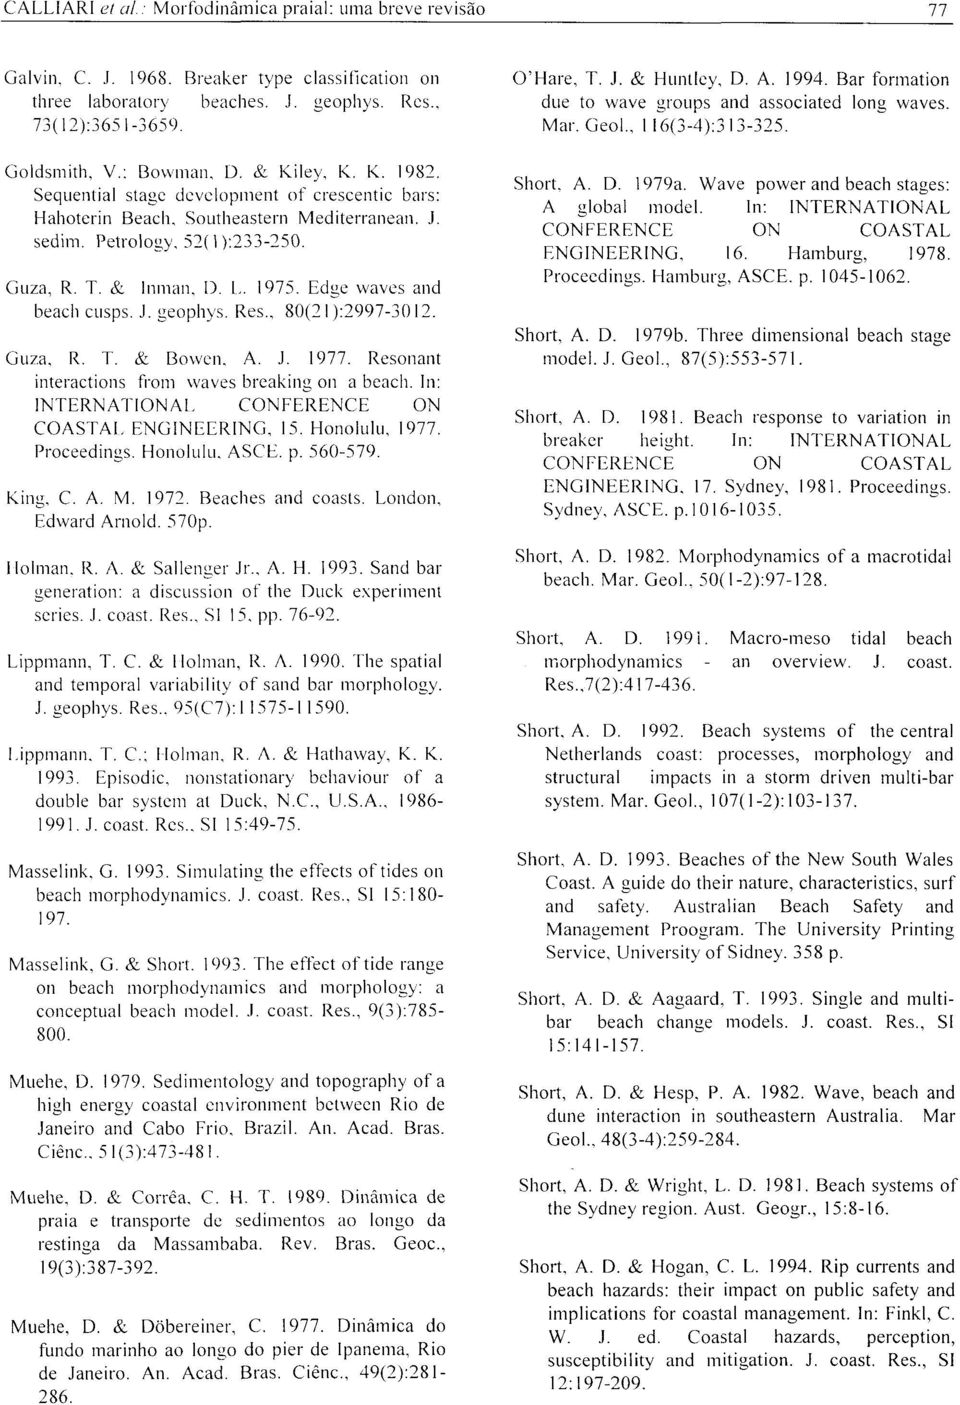 Res., 80(21):2997-3012. Guza, R. T. & Bowen. A. J. 1977. Resonant interactions from waves breaking on a beach. In: INTERNATIONAL CONFERENCE ON COASTAL ENGINEERING, 15. Honolulu, 1977. Proceedings.